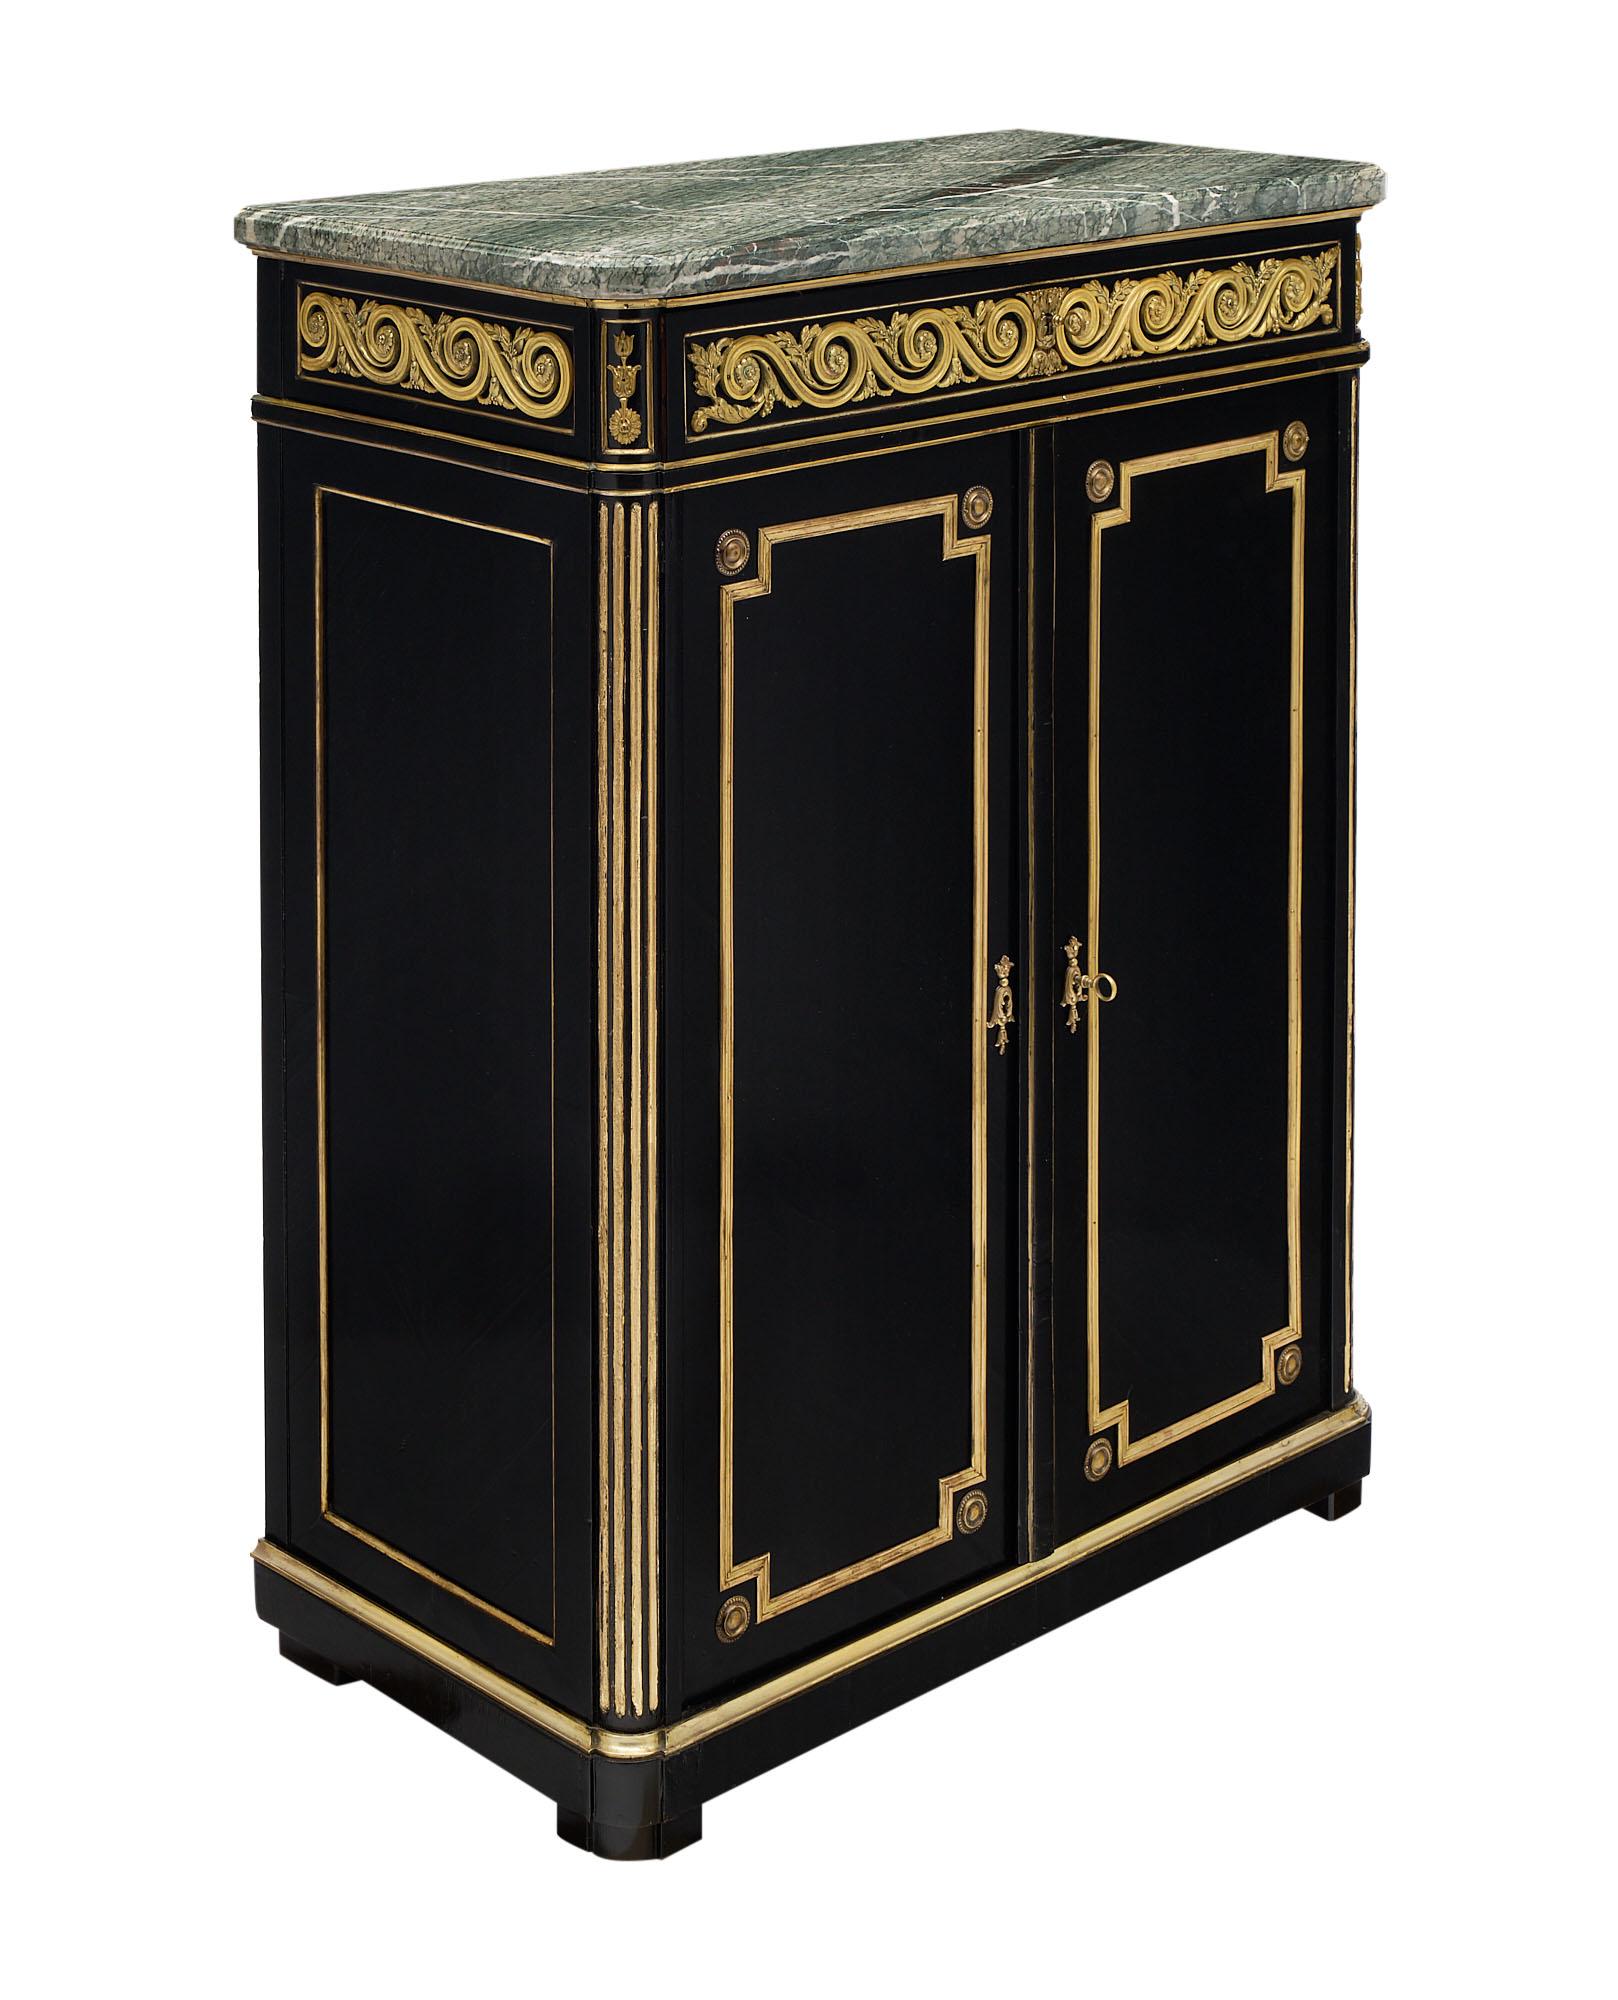 Buffet from France made of ebonized mahogany from the Napoleon III period. The precious cabinet features extensive gilt trims throughout and a rich ormolu frieze adorning the apron. The Pietra Verde marble top is intact and original.